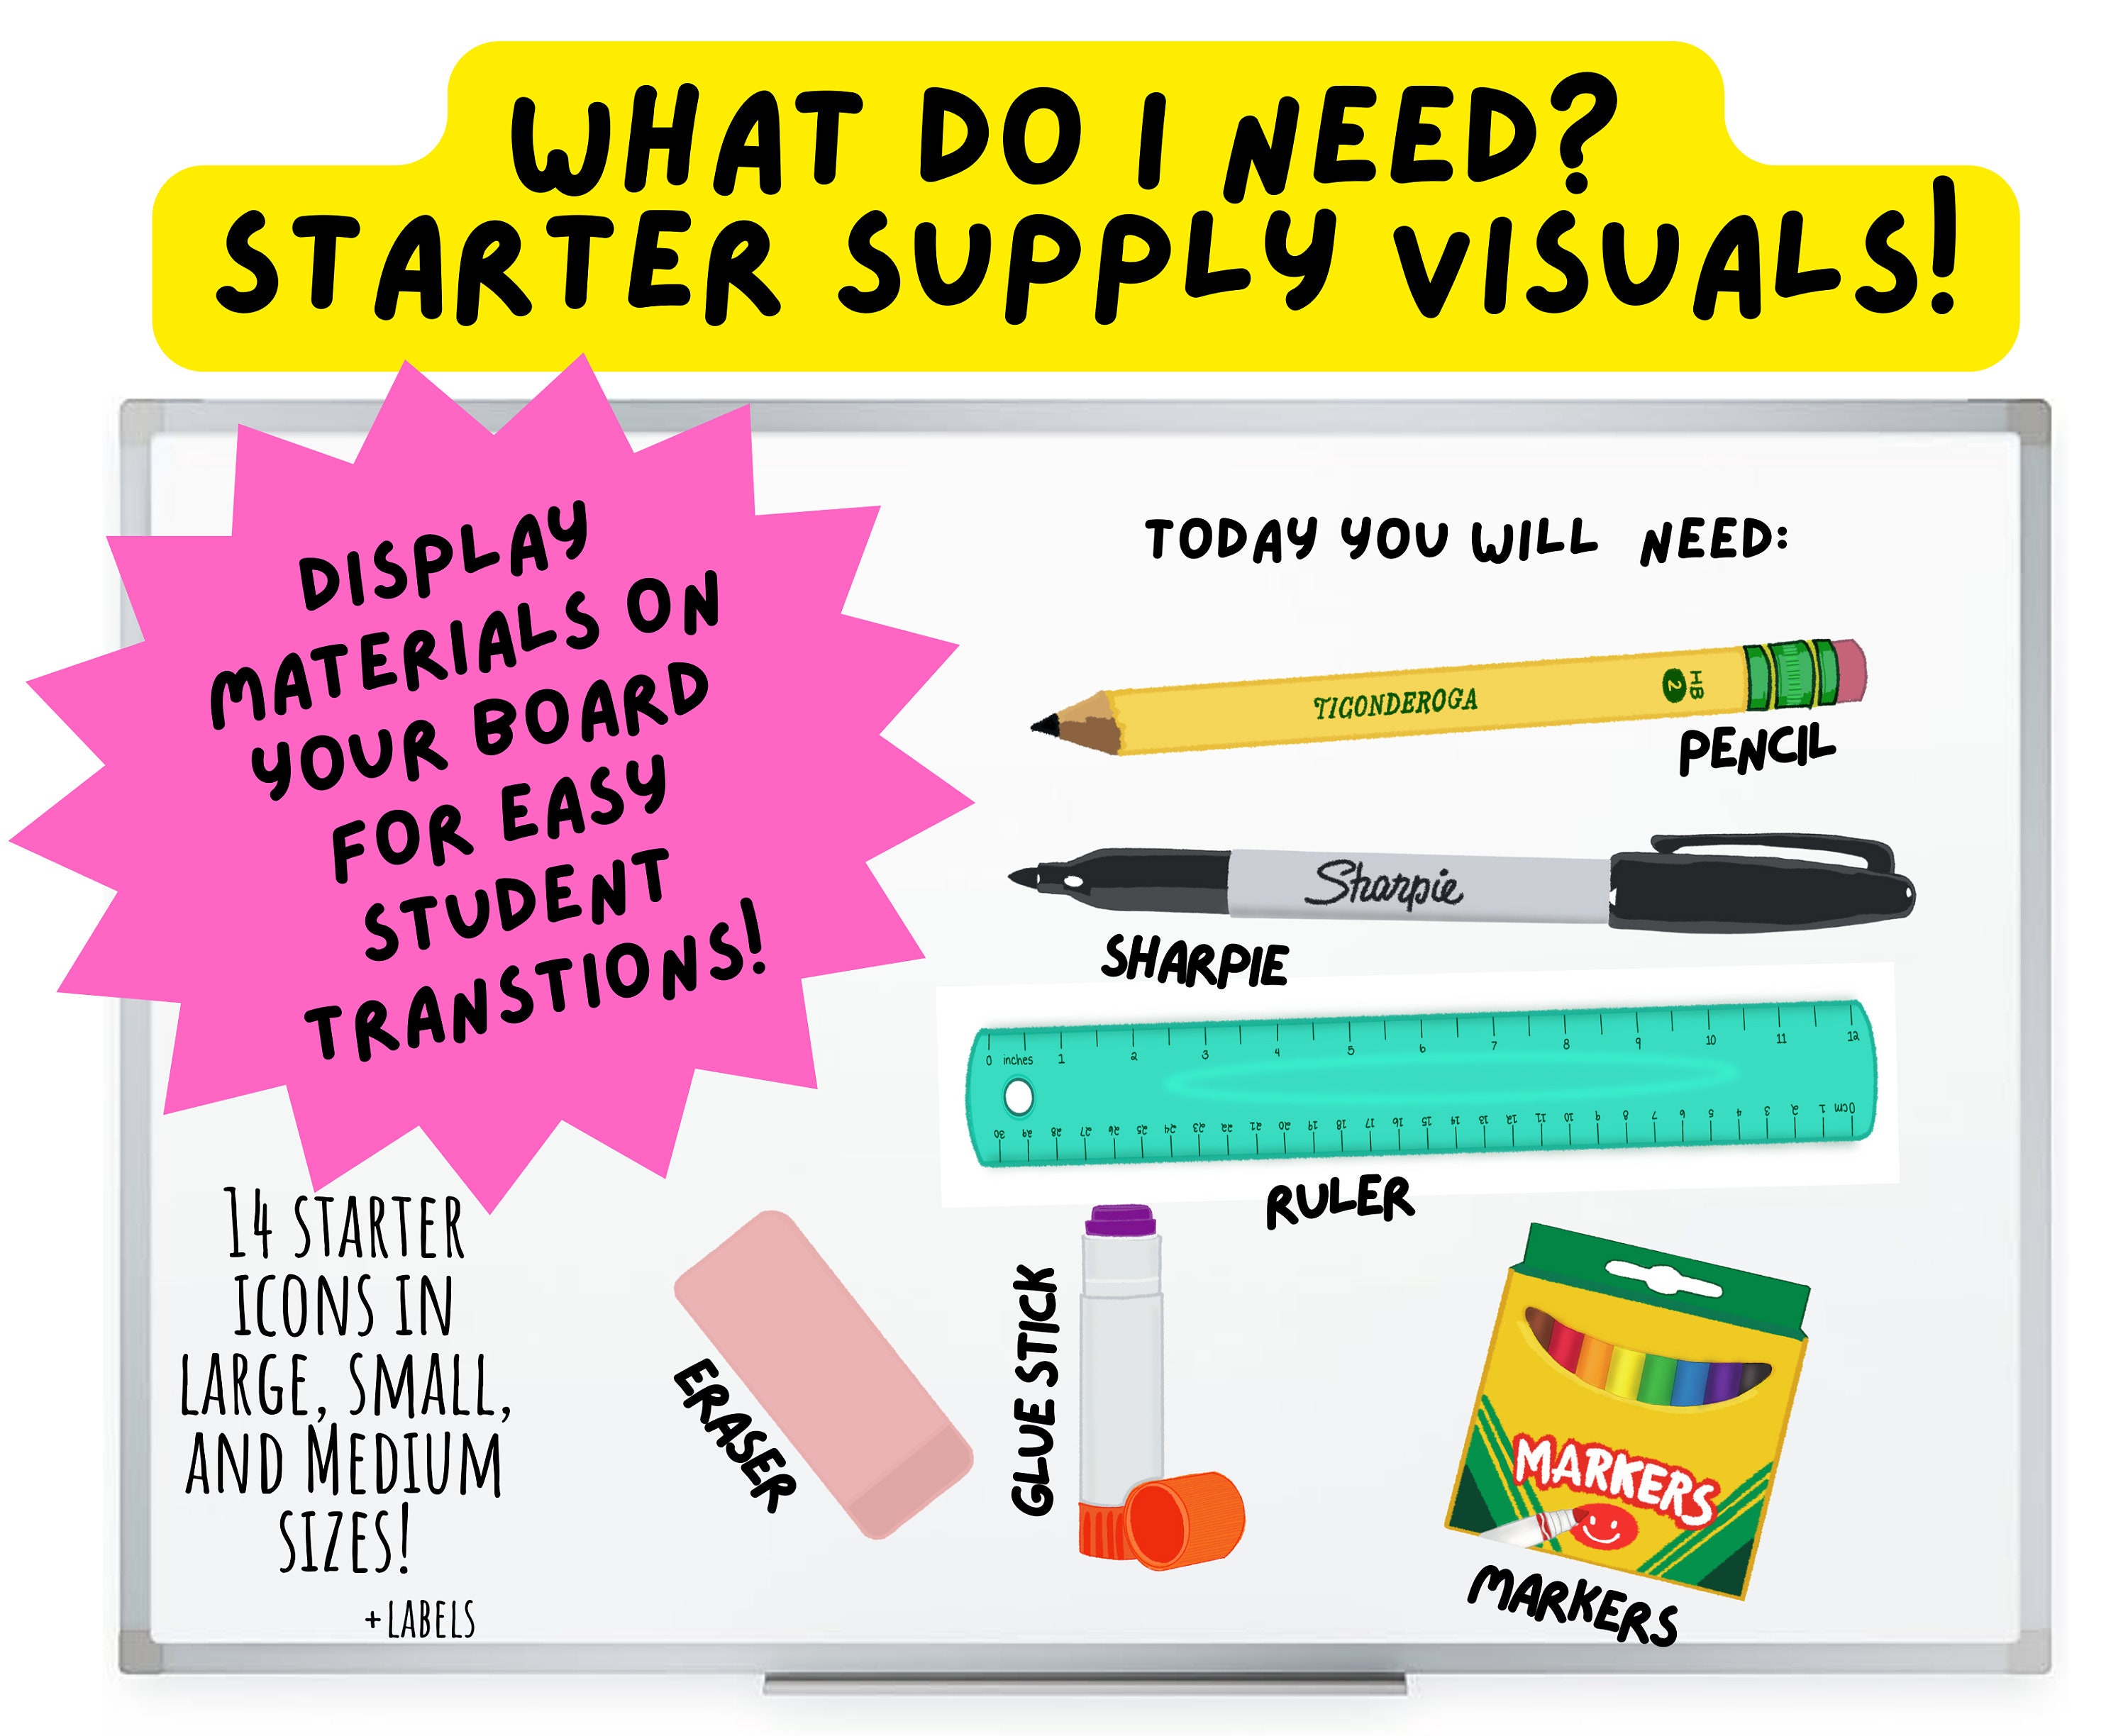 70+ Must-Have Teacher School Supplies for Your Classroom